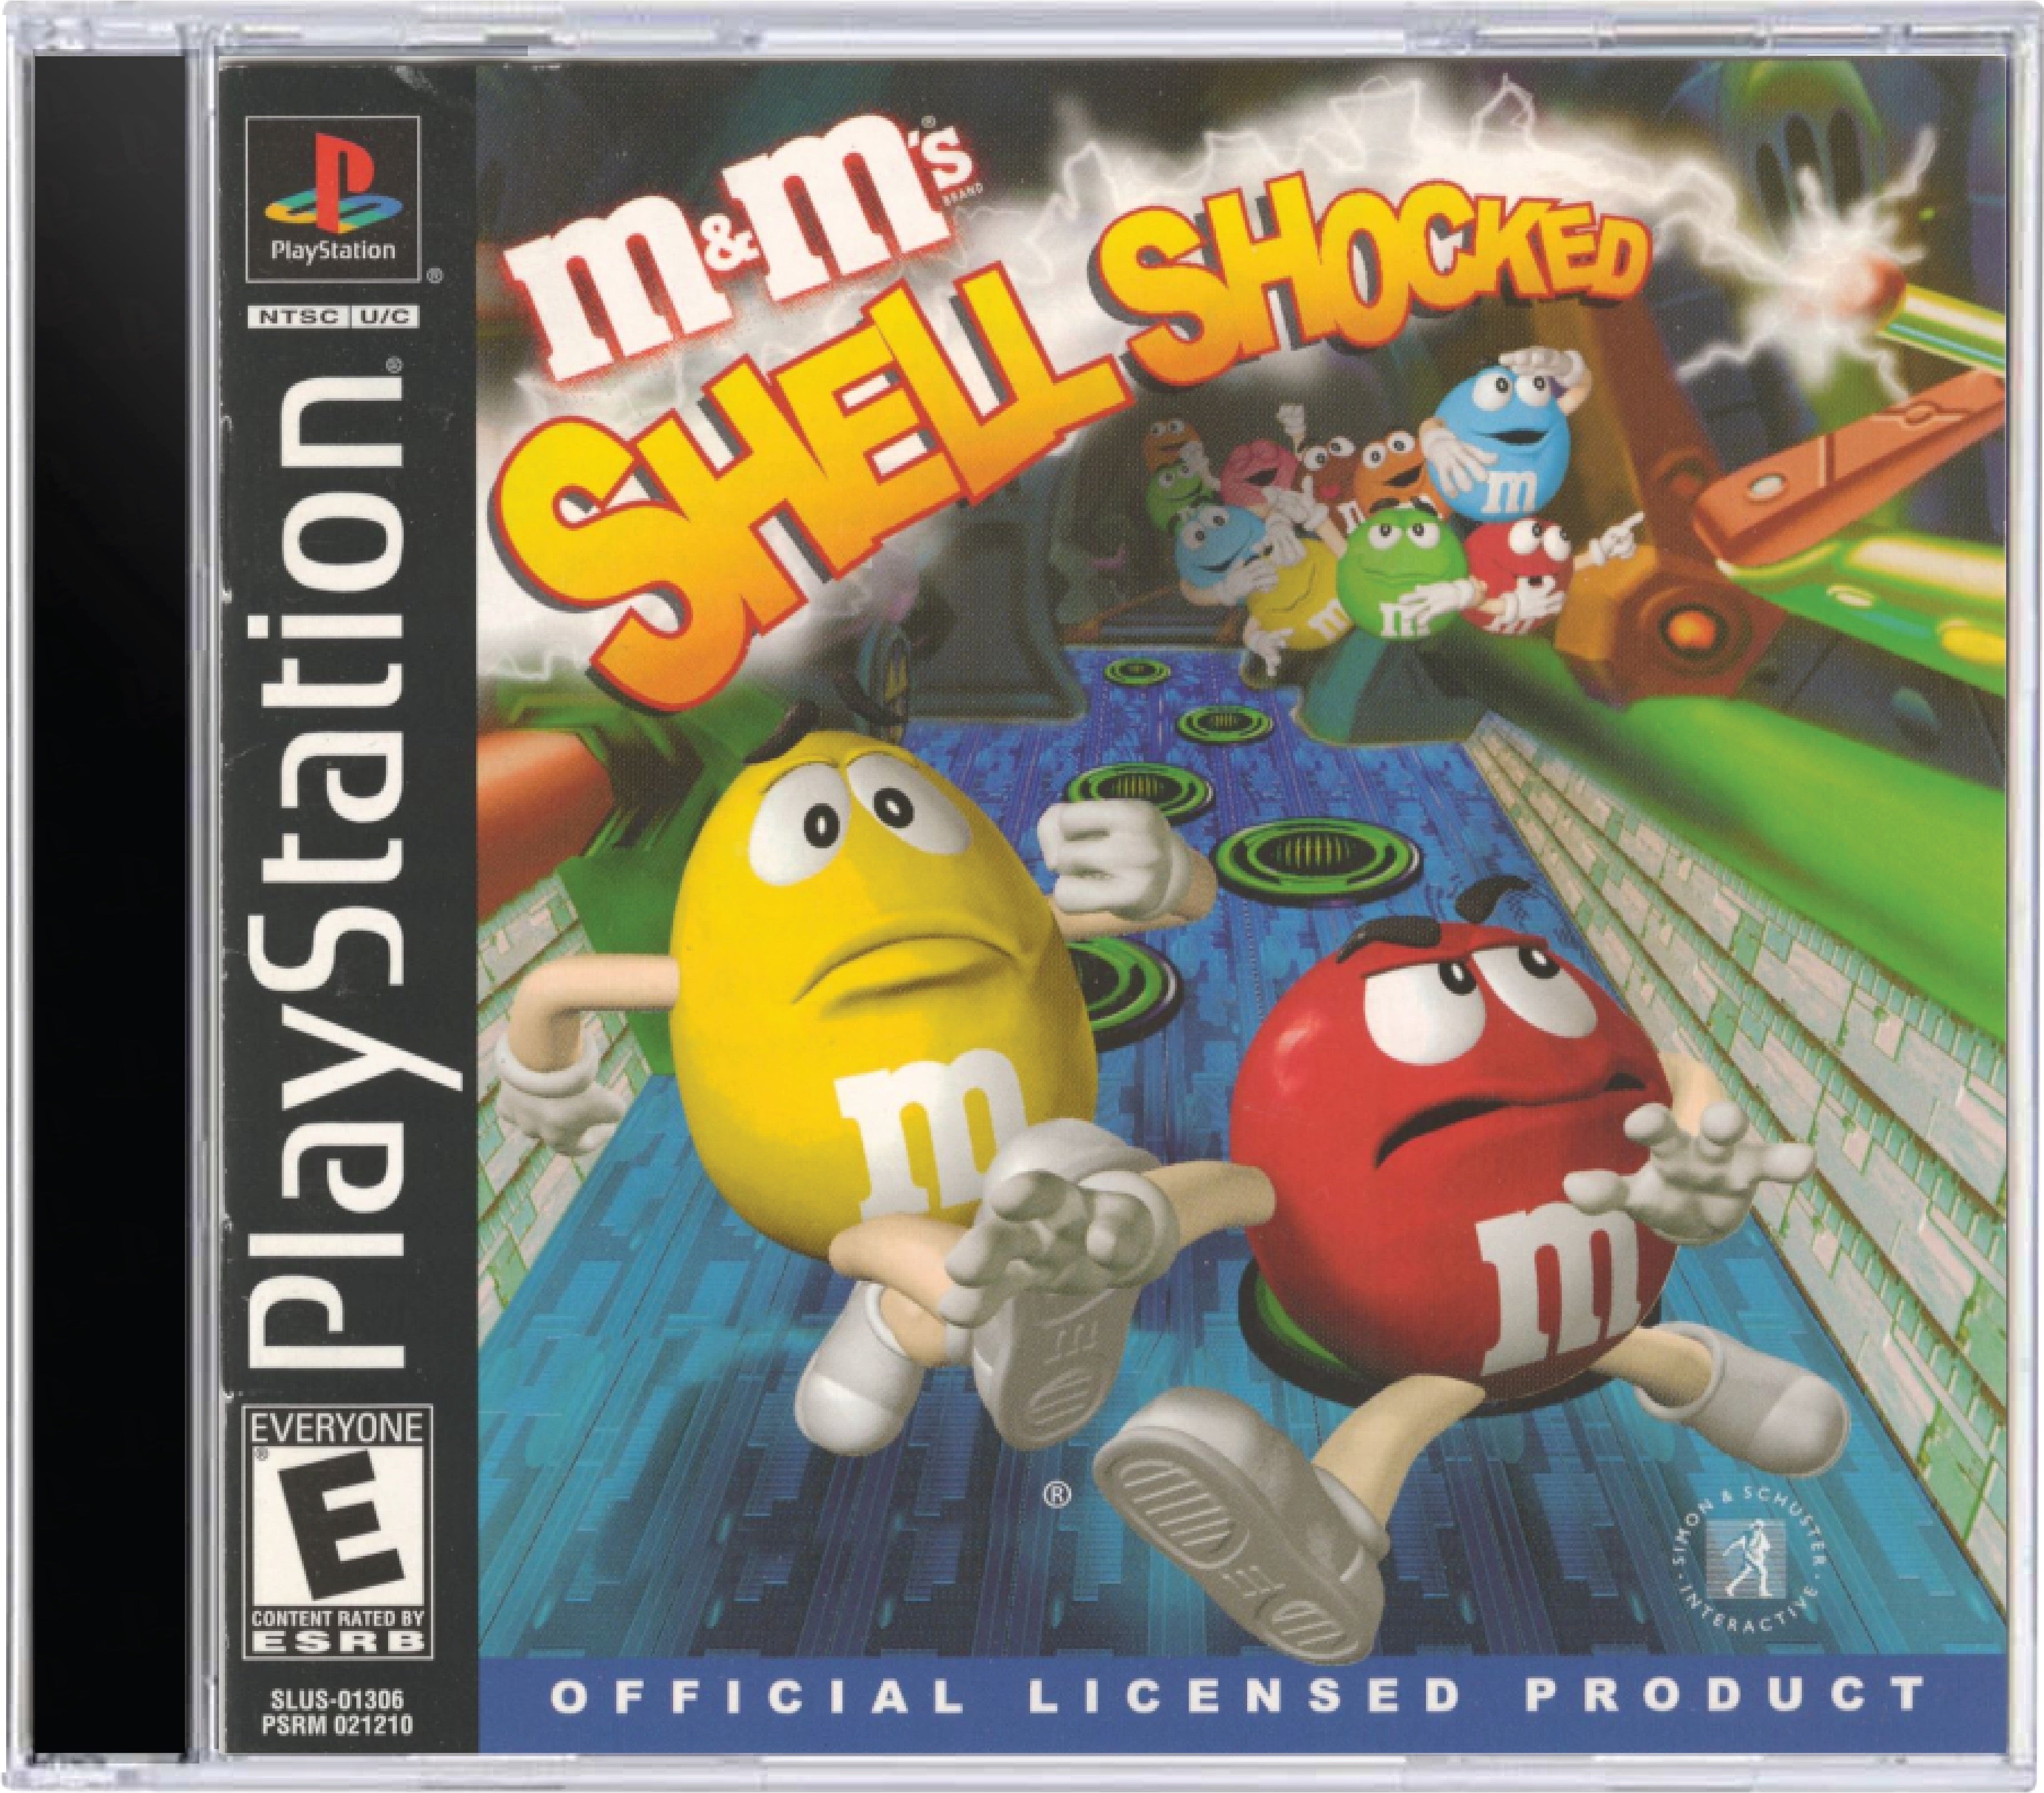 M And M's Shell Shocked Cover Art and Product Photo